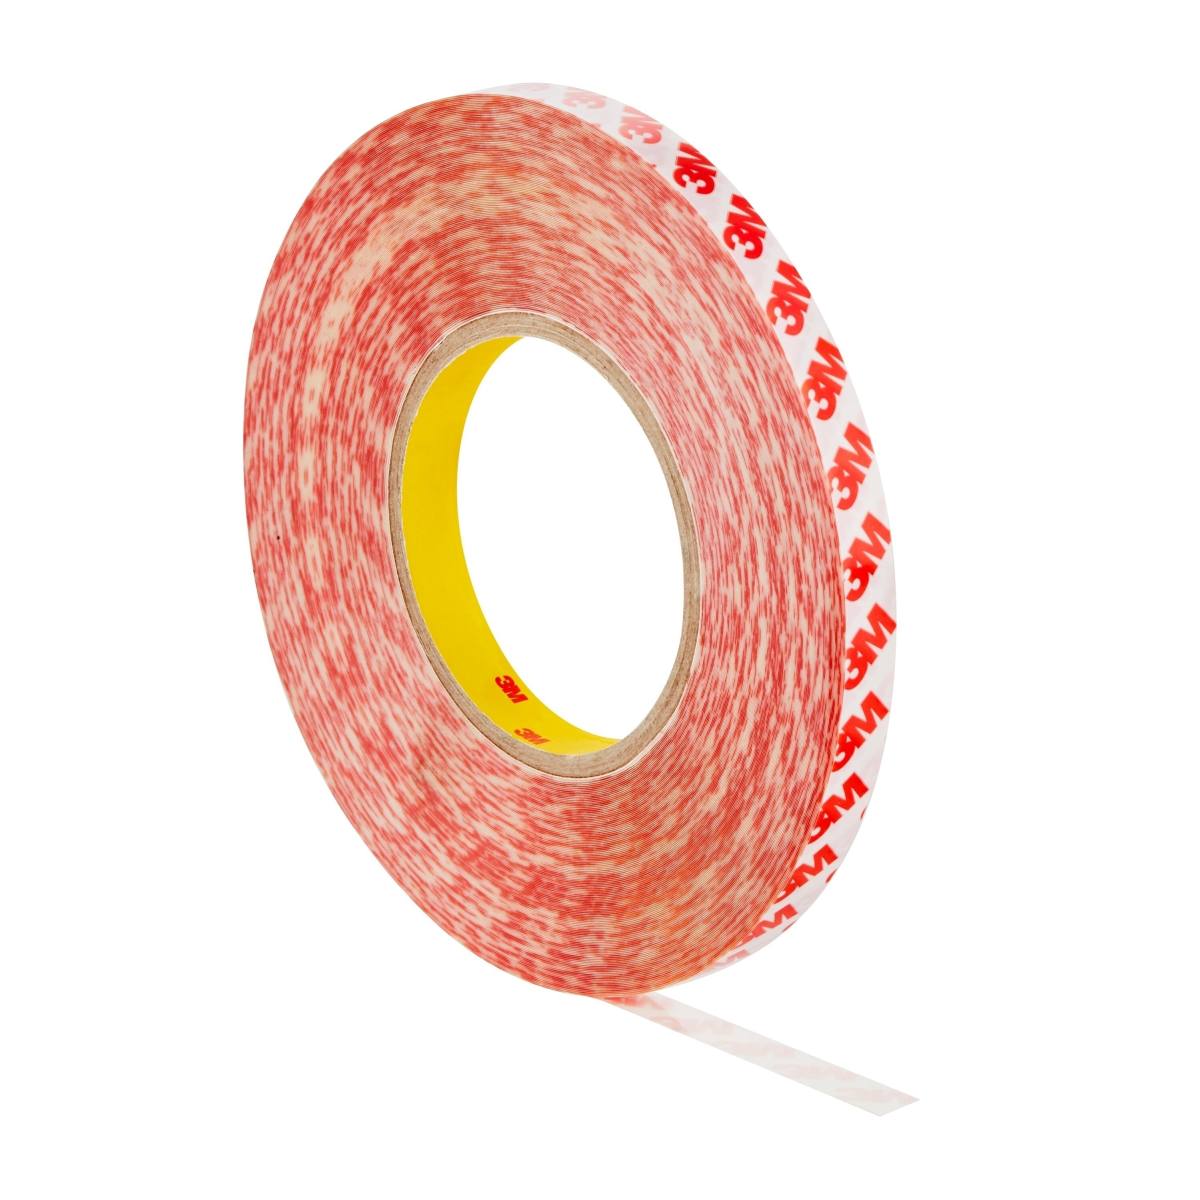 3M Double-sided adhesive tape with polyester backing GPT-020P, transparent, 1540 mm x 50 m, 0.202 mm